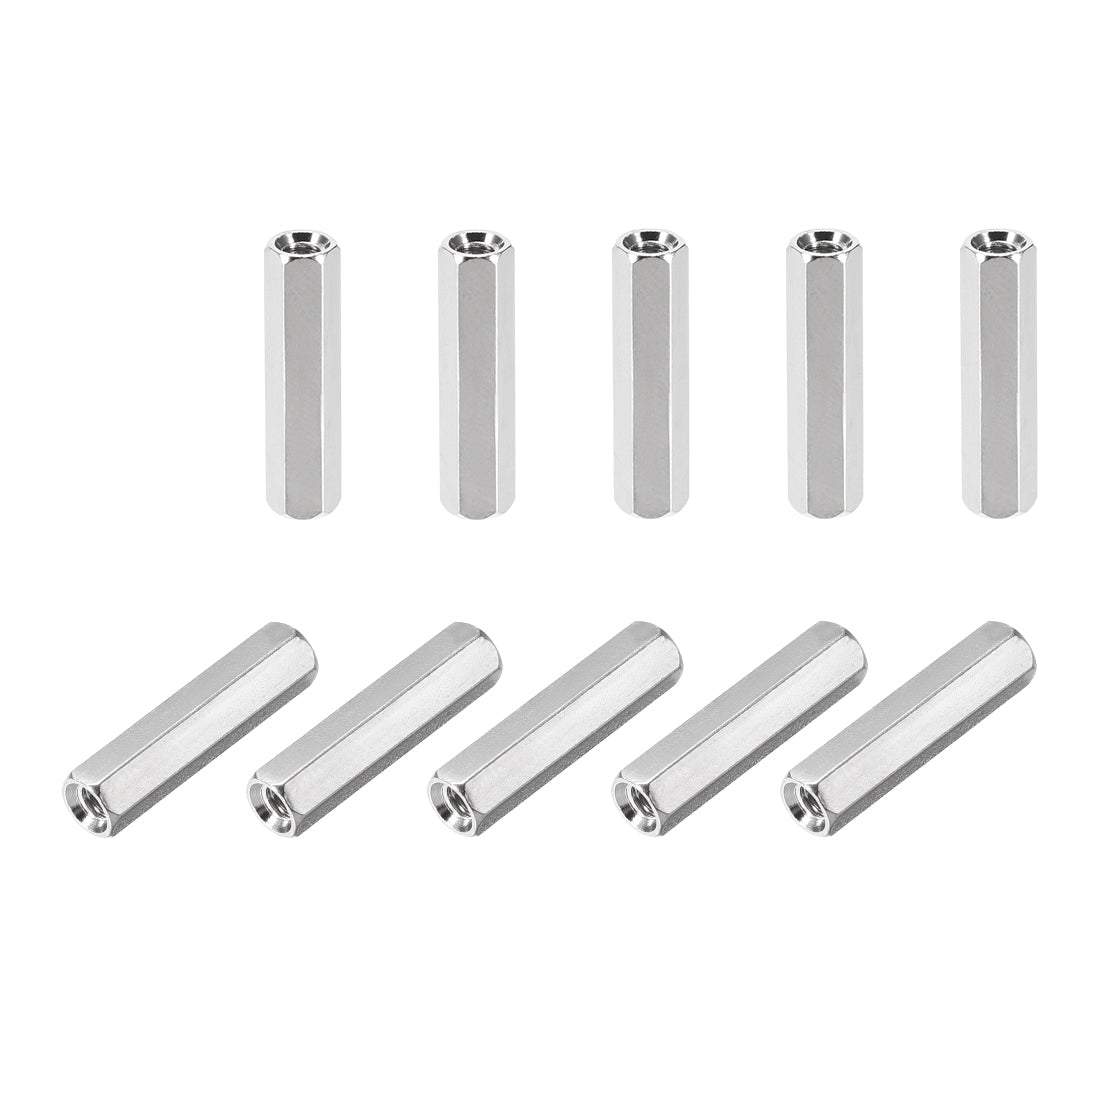 Uxcell Uxcell M3 x 30mm Female to Female Hex Nickel Plated Spacer Standoff 50pcs